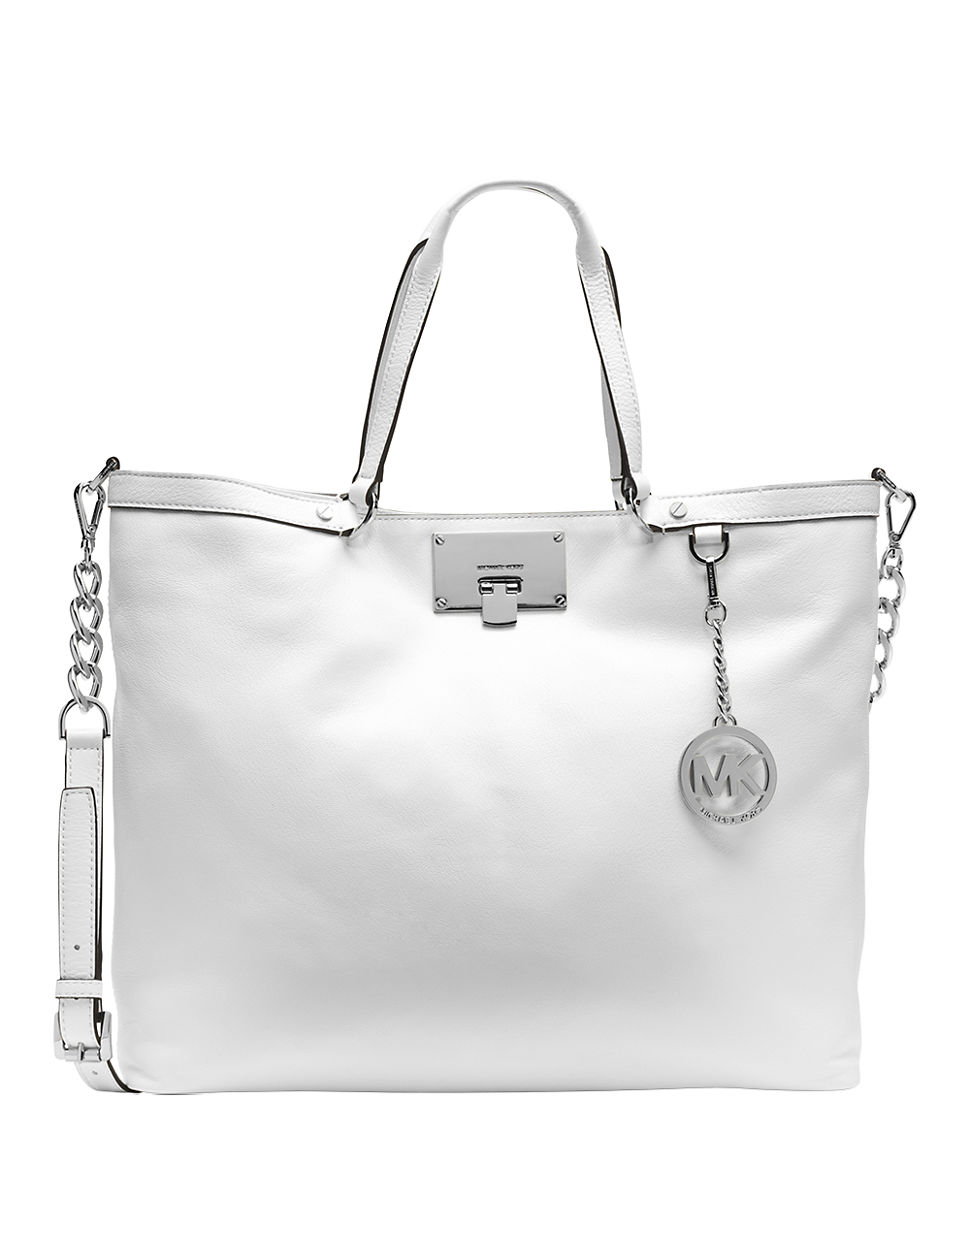 Michael Michael Kors Channing Leather Large Shoulder Tote Bag in White ...